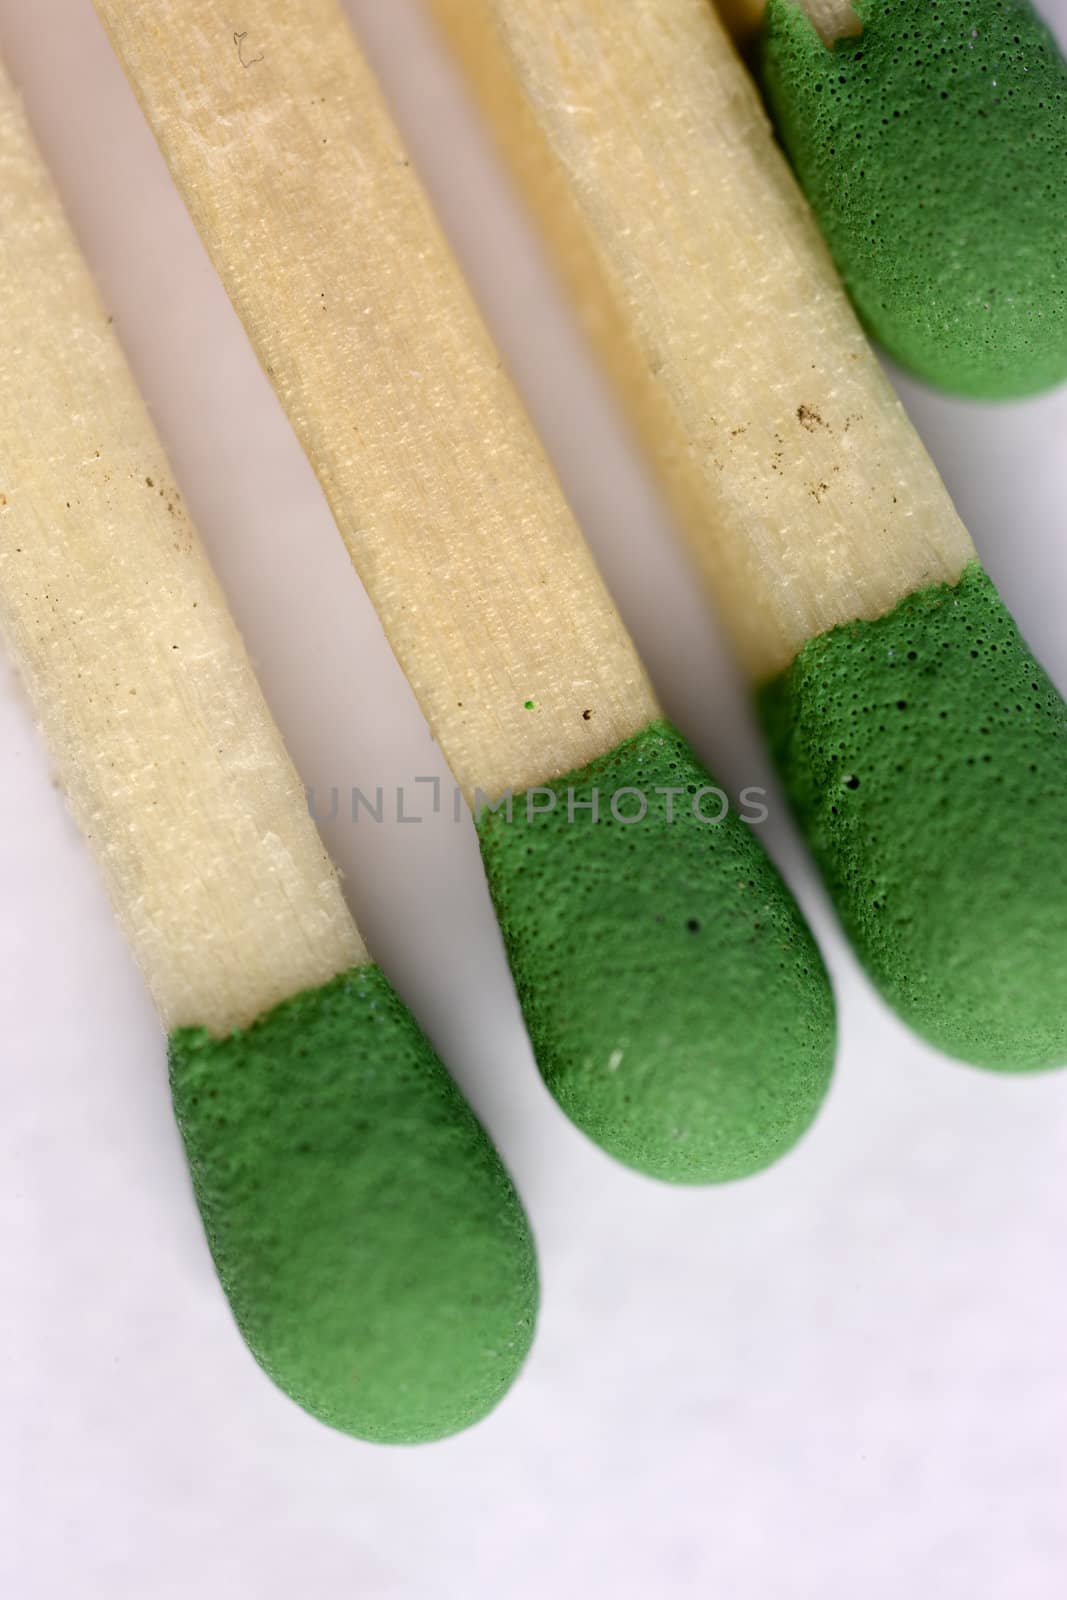 Detailed macro shot of a few matches.